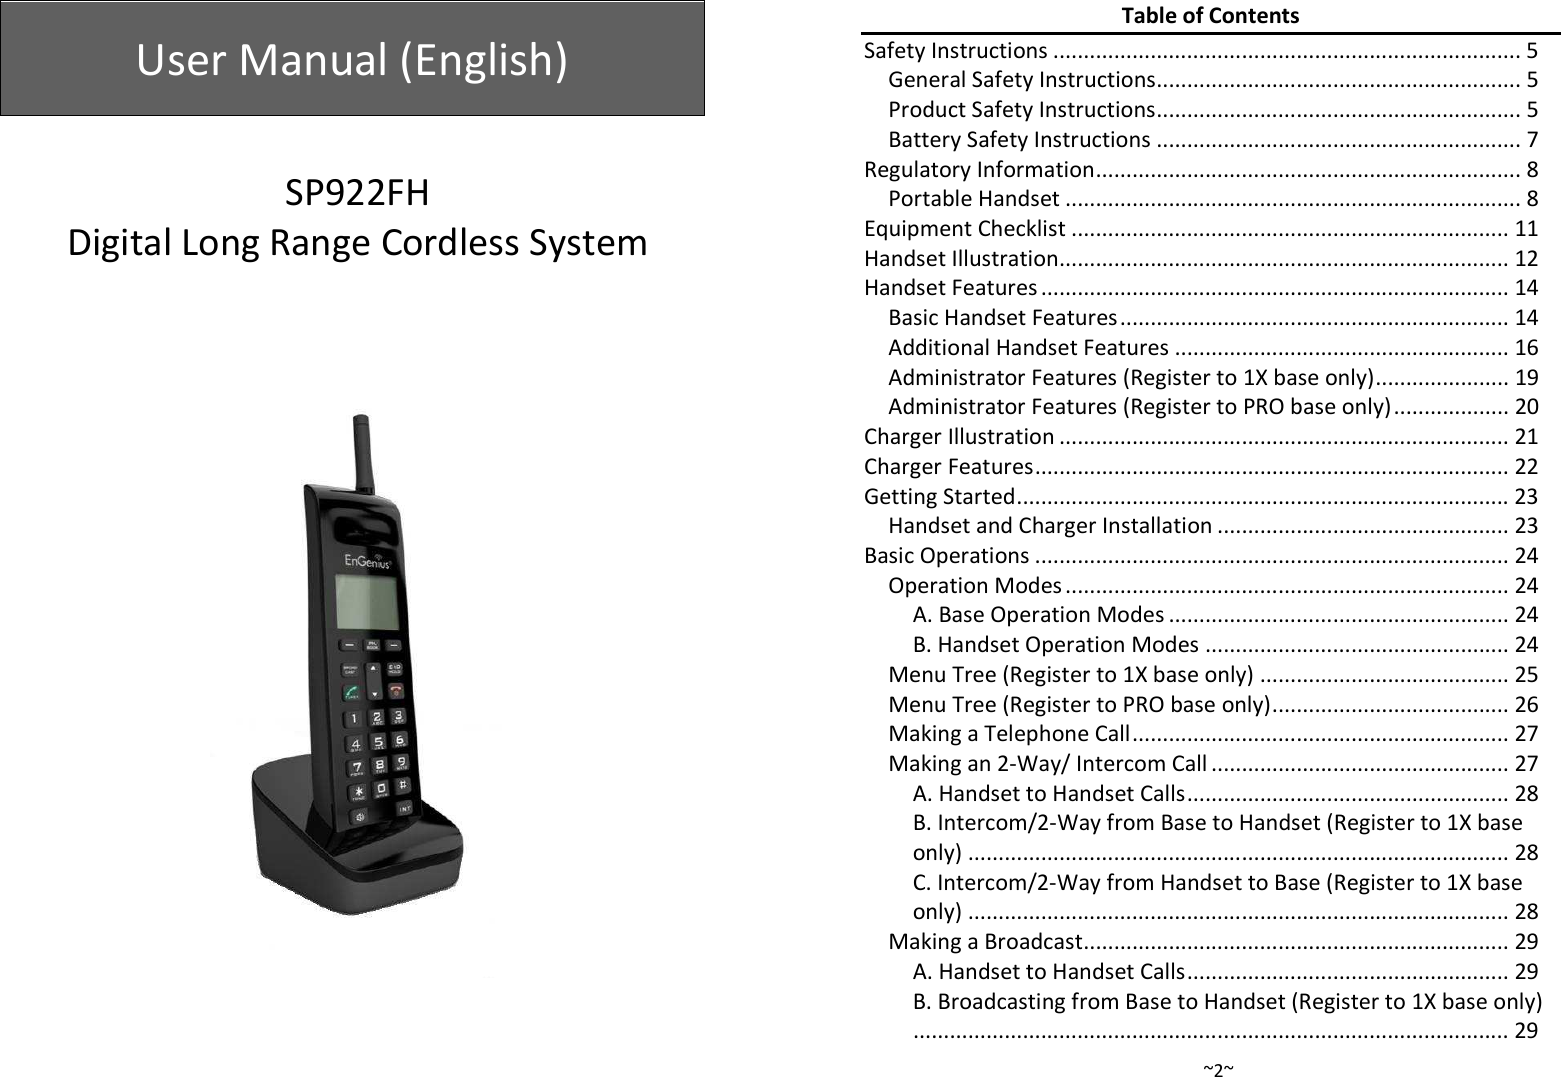  User Manual (English)    SP922FH Digital Long Range Cordless System      ~2~Table of Contents Safety Instructions ............................................................................. 5 General Safety Instructions ............................................................ 5 Product Safety Instructions ............................................................ 5 Battery Safety Instructions ............................................................ 7 Regulatory Information ...................................................................... 8 Portable Handset ........................................................................... 8 Equipment Checklist ........................................................................ 11 Handset Illustration.......................................................................... 12 Handset Features ............................................................................. 14 Basic Handset Features ................................................................ 14 Additional Handset Features ....................................................... 16 Administrator Features (Register to 1X base only) ...................... 19 Administrator Features (Register to PRO base only) ................... 20 Charger Illustration .......................................................................... 21 Charger Features .............................................................................. 22 Getting Started ................................................................................. 23 Handset and Charger Installation ................................................ 23 Basic Operations .............................................................................. 24 Operation Modes ......................................................................... 24 A. Base Operation Modes ........................................................ 24 B. Handset Operation Modes .................................................. 24 Menu Tree (Register to 1X base only) ......................................... 25 Menu Tree (Register to PRO base only) ....................................... 26 Making a Telephone Call .............................................................. 27 Making an 2-Way/ Intercom Call ................................................. 27 A. Handset to Handset Calls ..................................................... 28 B. Intercom/2-Way from Base to Handset (Register to 1X base only) ......................................................................................... 28 C. Intercom/2-Way from Handset to Base (Register to 1X base only) ......................................................................................... 28 Making a Broadcast ...................................................................... 29 A. Handset to Handset Calls ..................................................... 29 B. Broadcasting from Base to Handset (Register to 1X base only) .................................................................................................. 29 